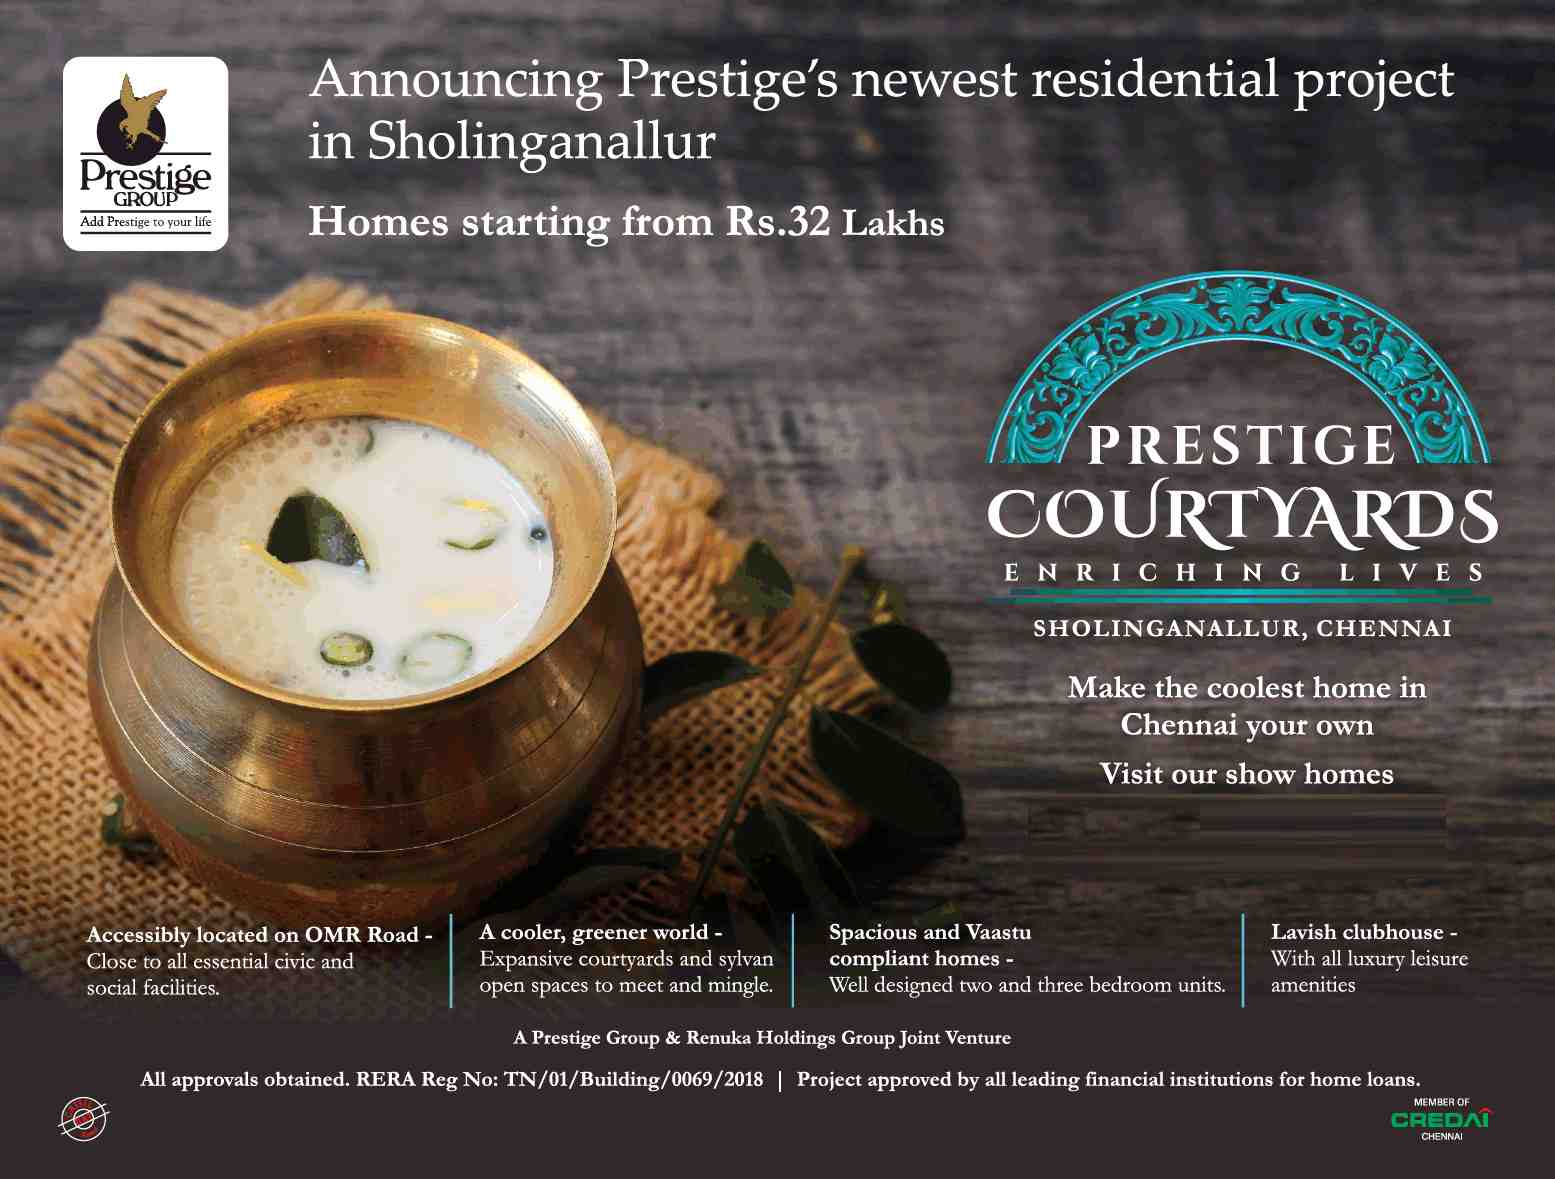 Book homes starting from Rs. 32 Lakhs at Prestige Courtyards in Chennai Update